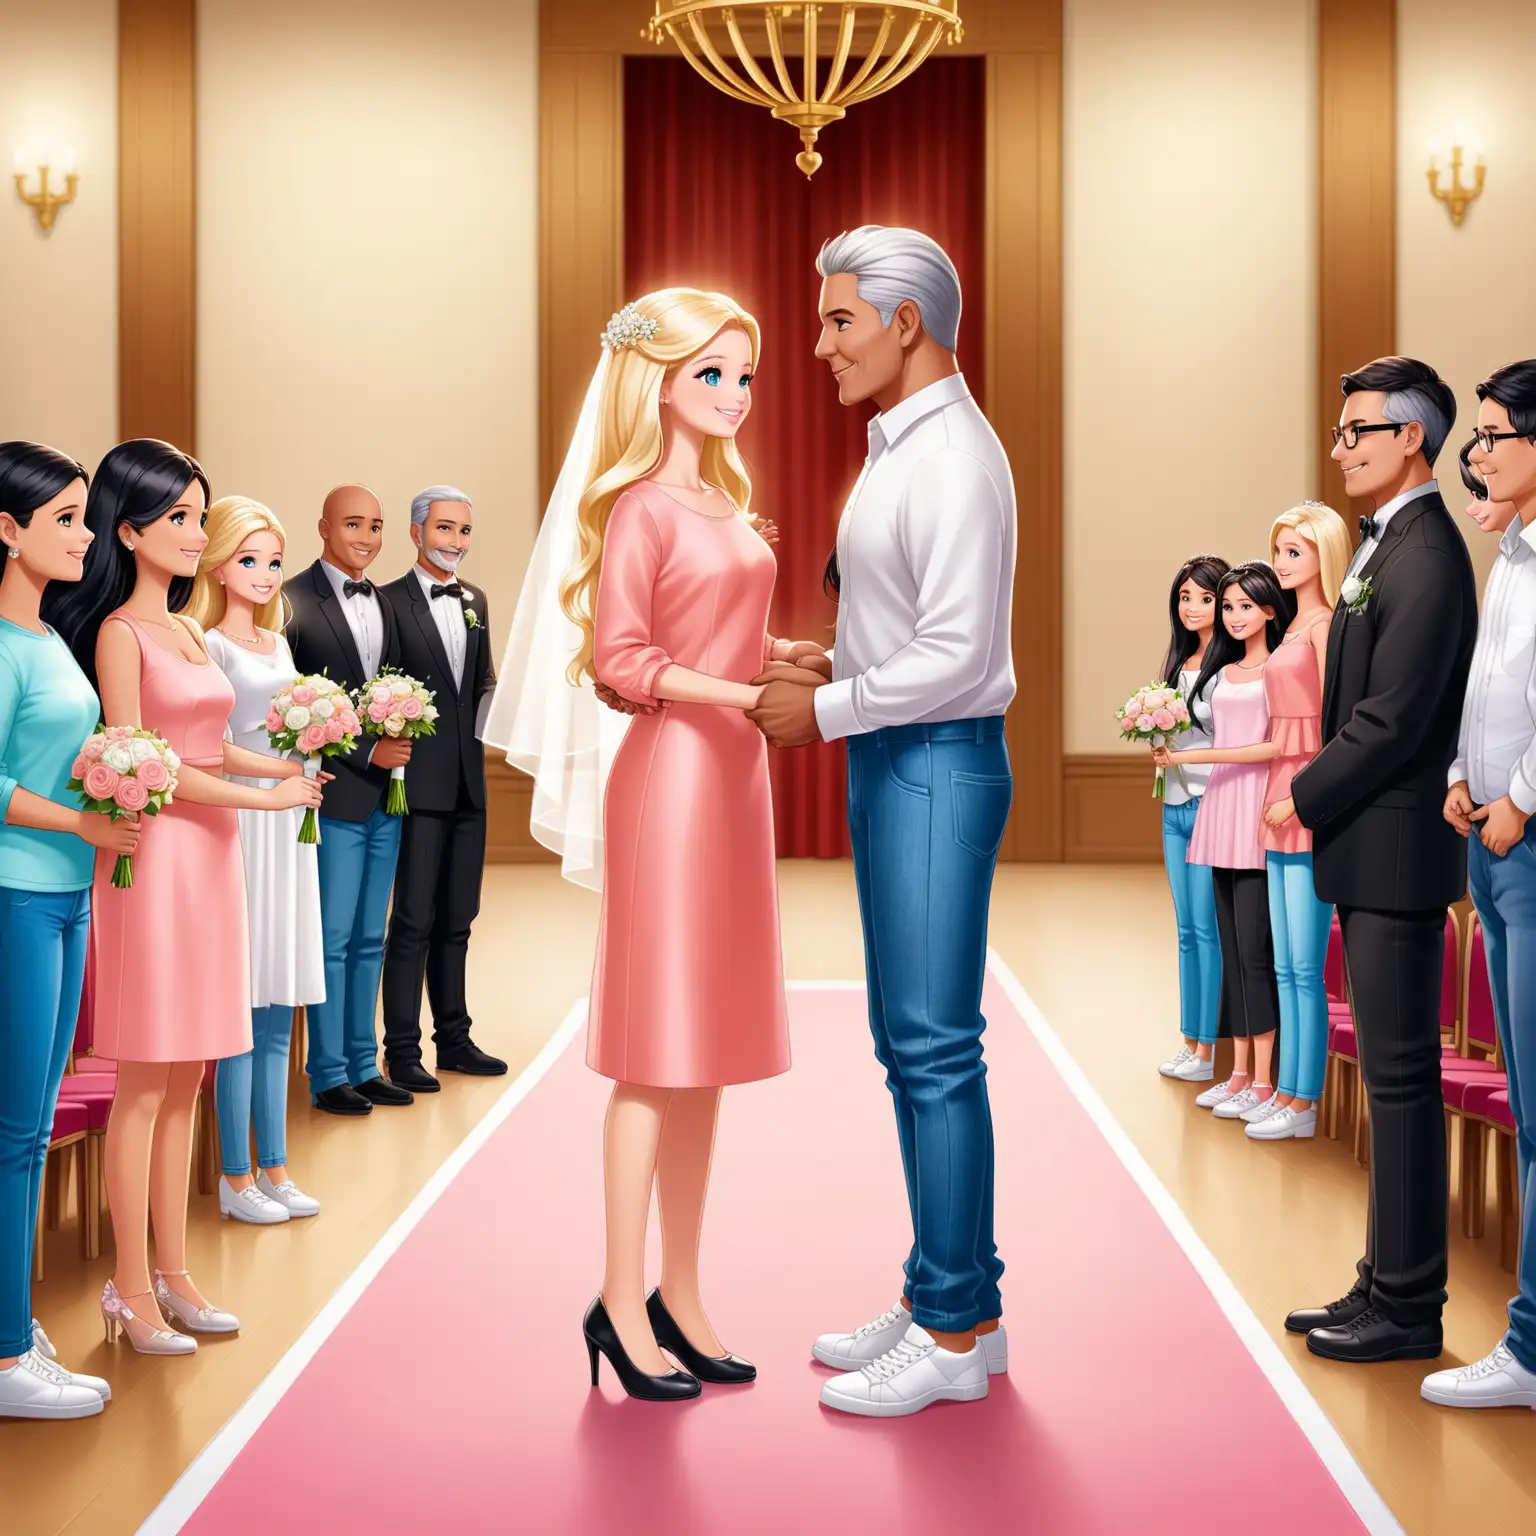 Andean Man and Barbie Doll Exchange Wedding Vows in Town Hall Ceremony